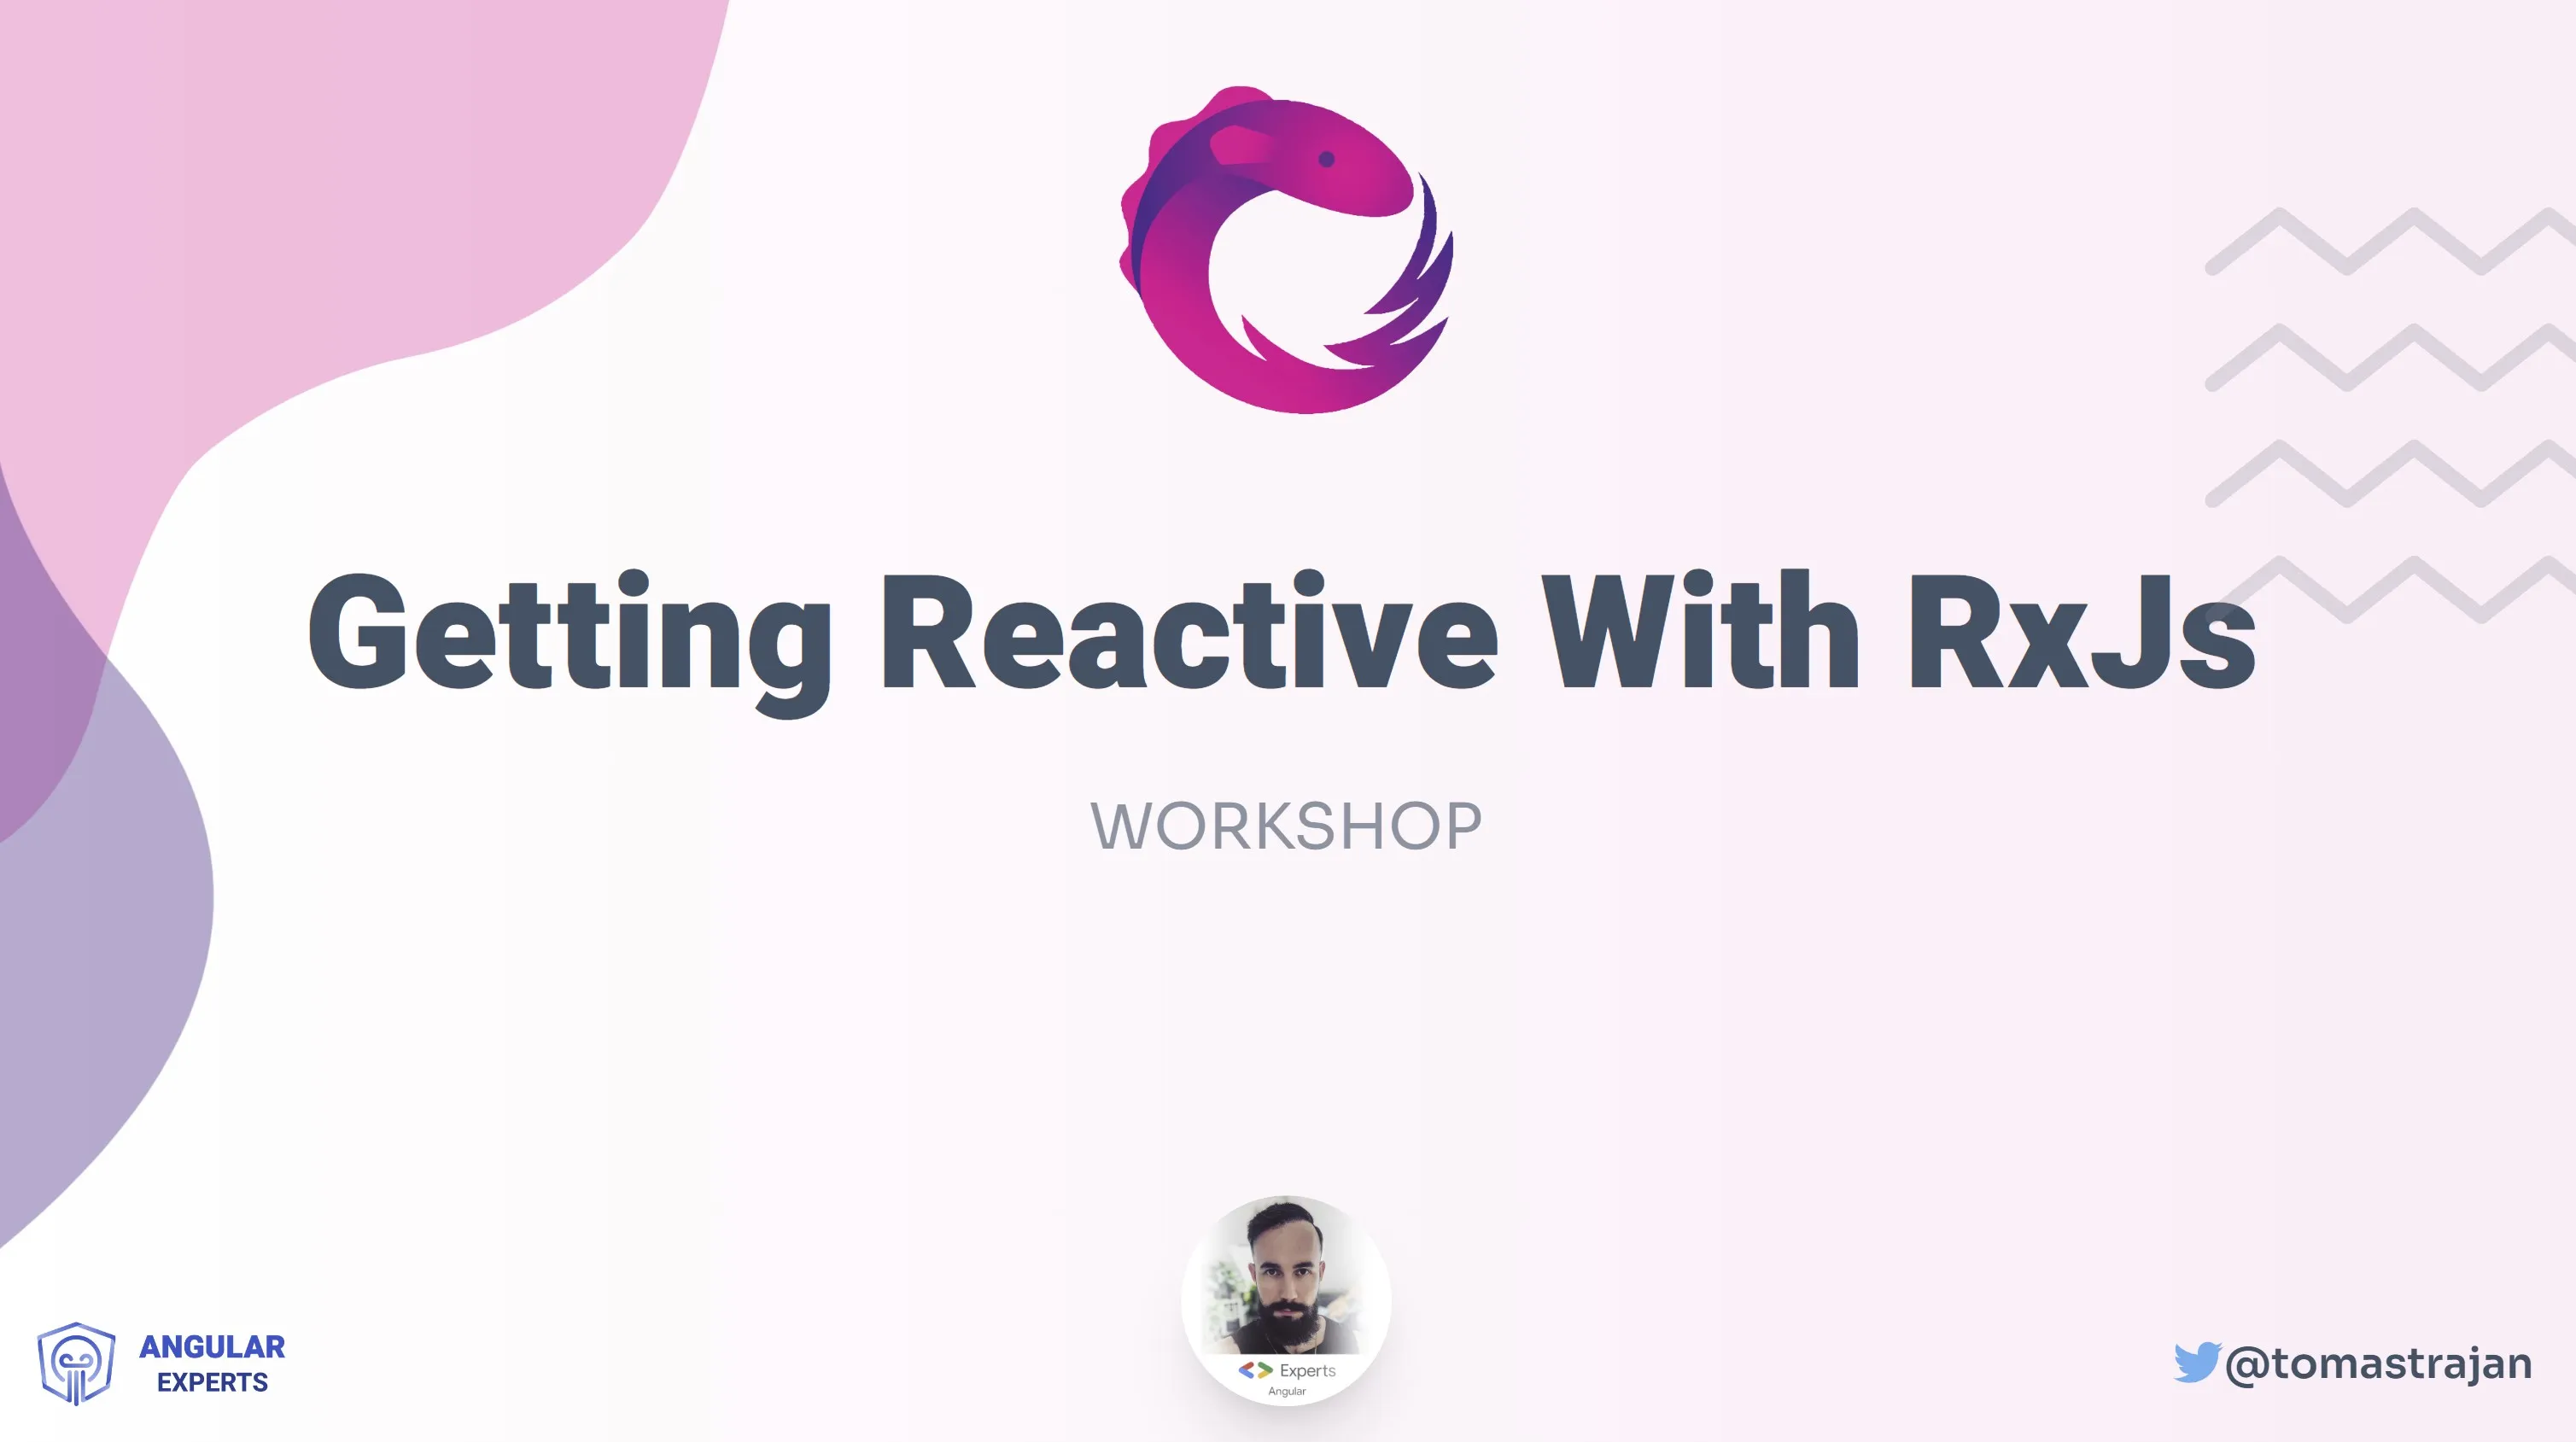 Getting Reactive With RxJs Workshop